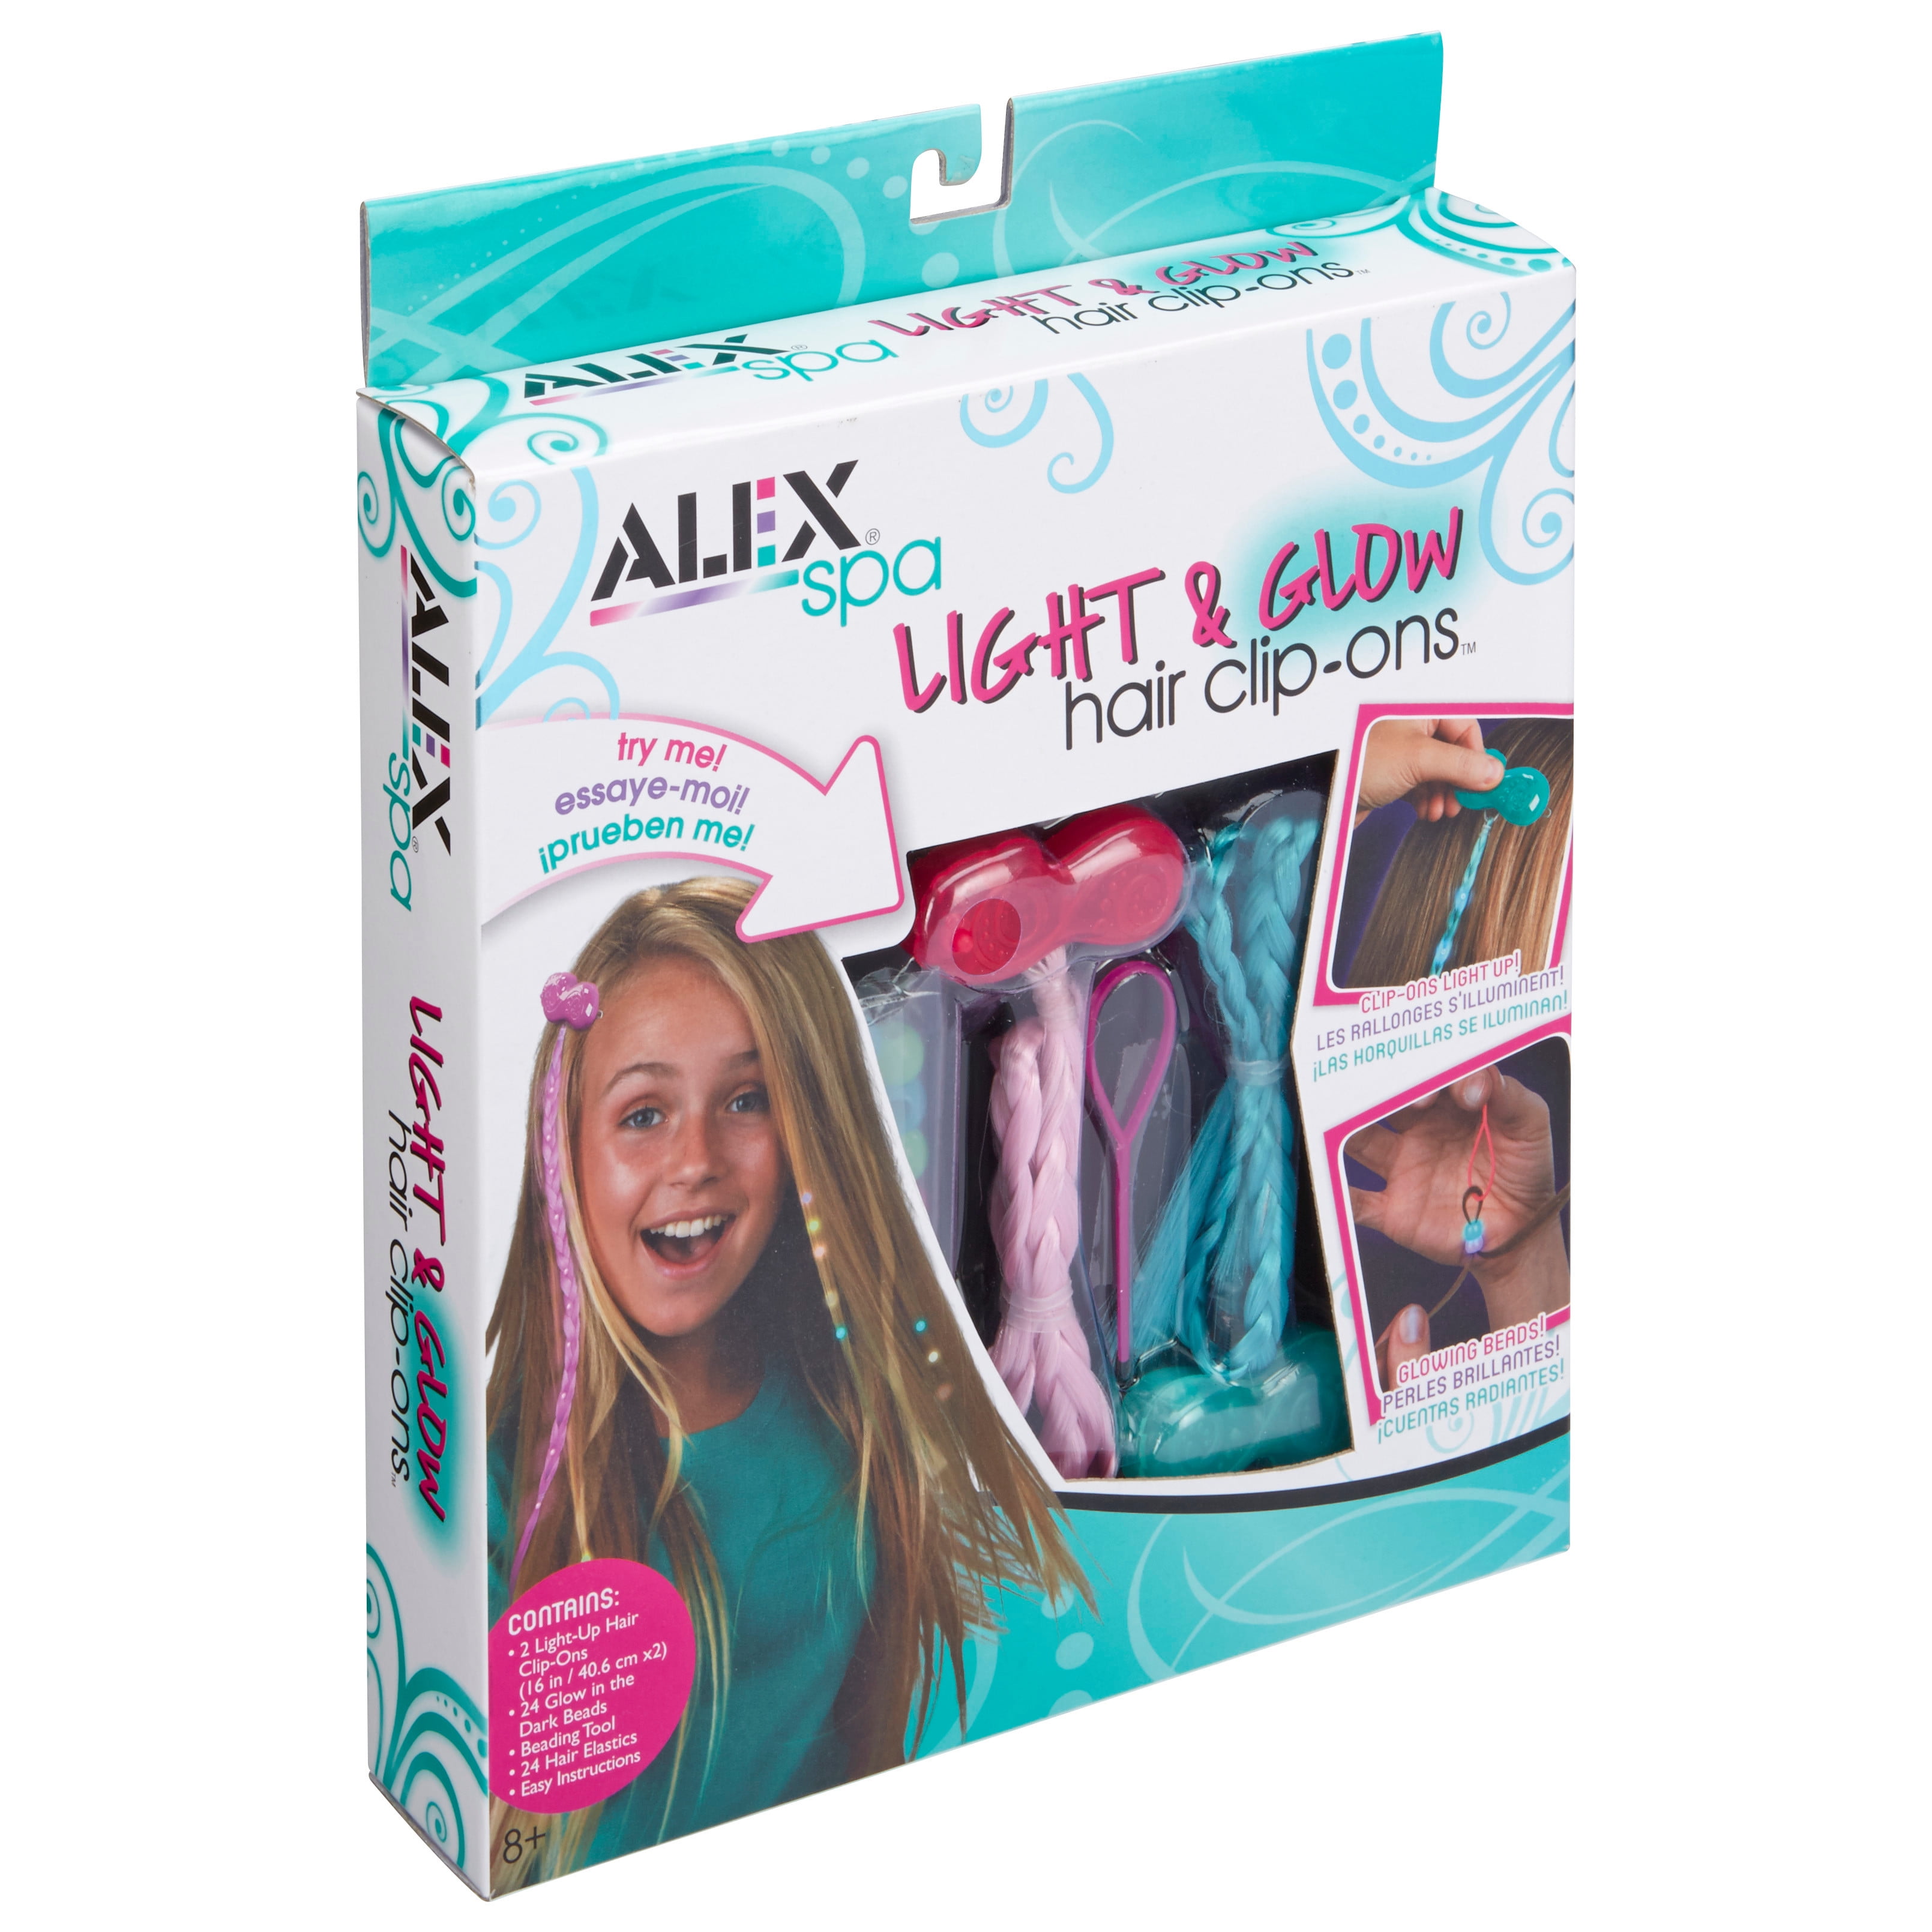 Glow in the Dark Beads and Hair Accessories